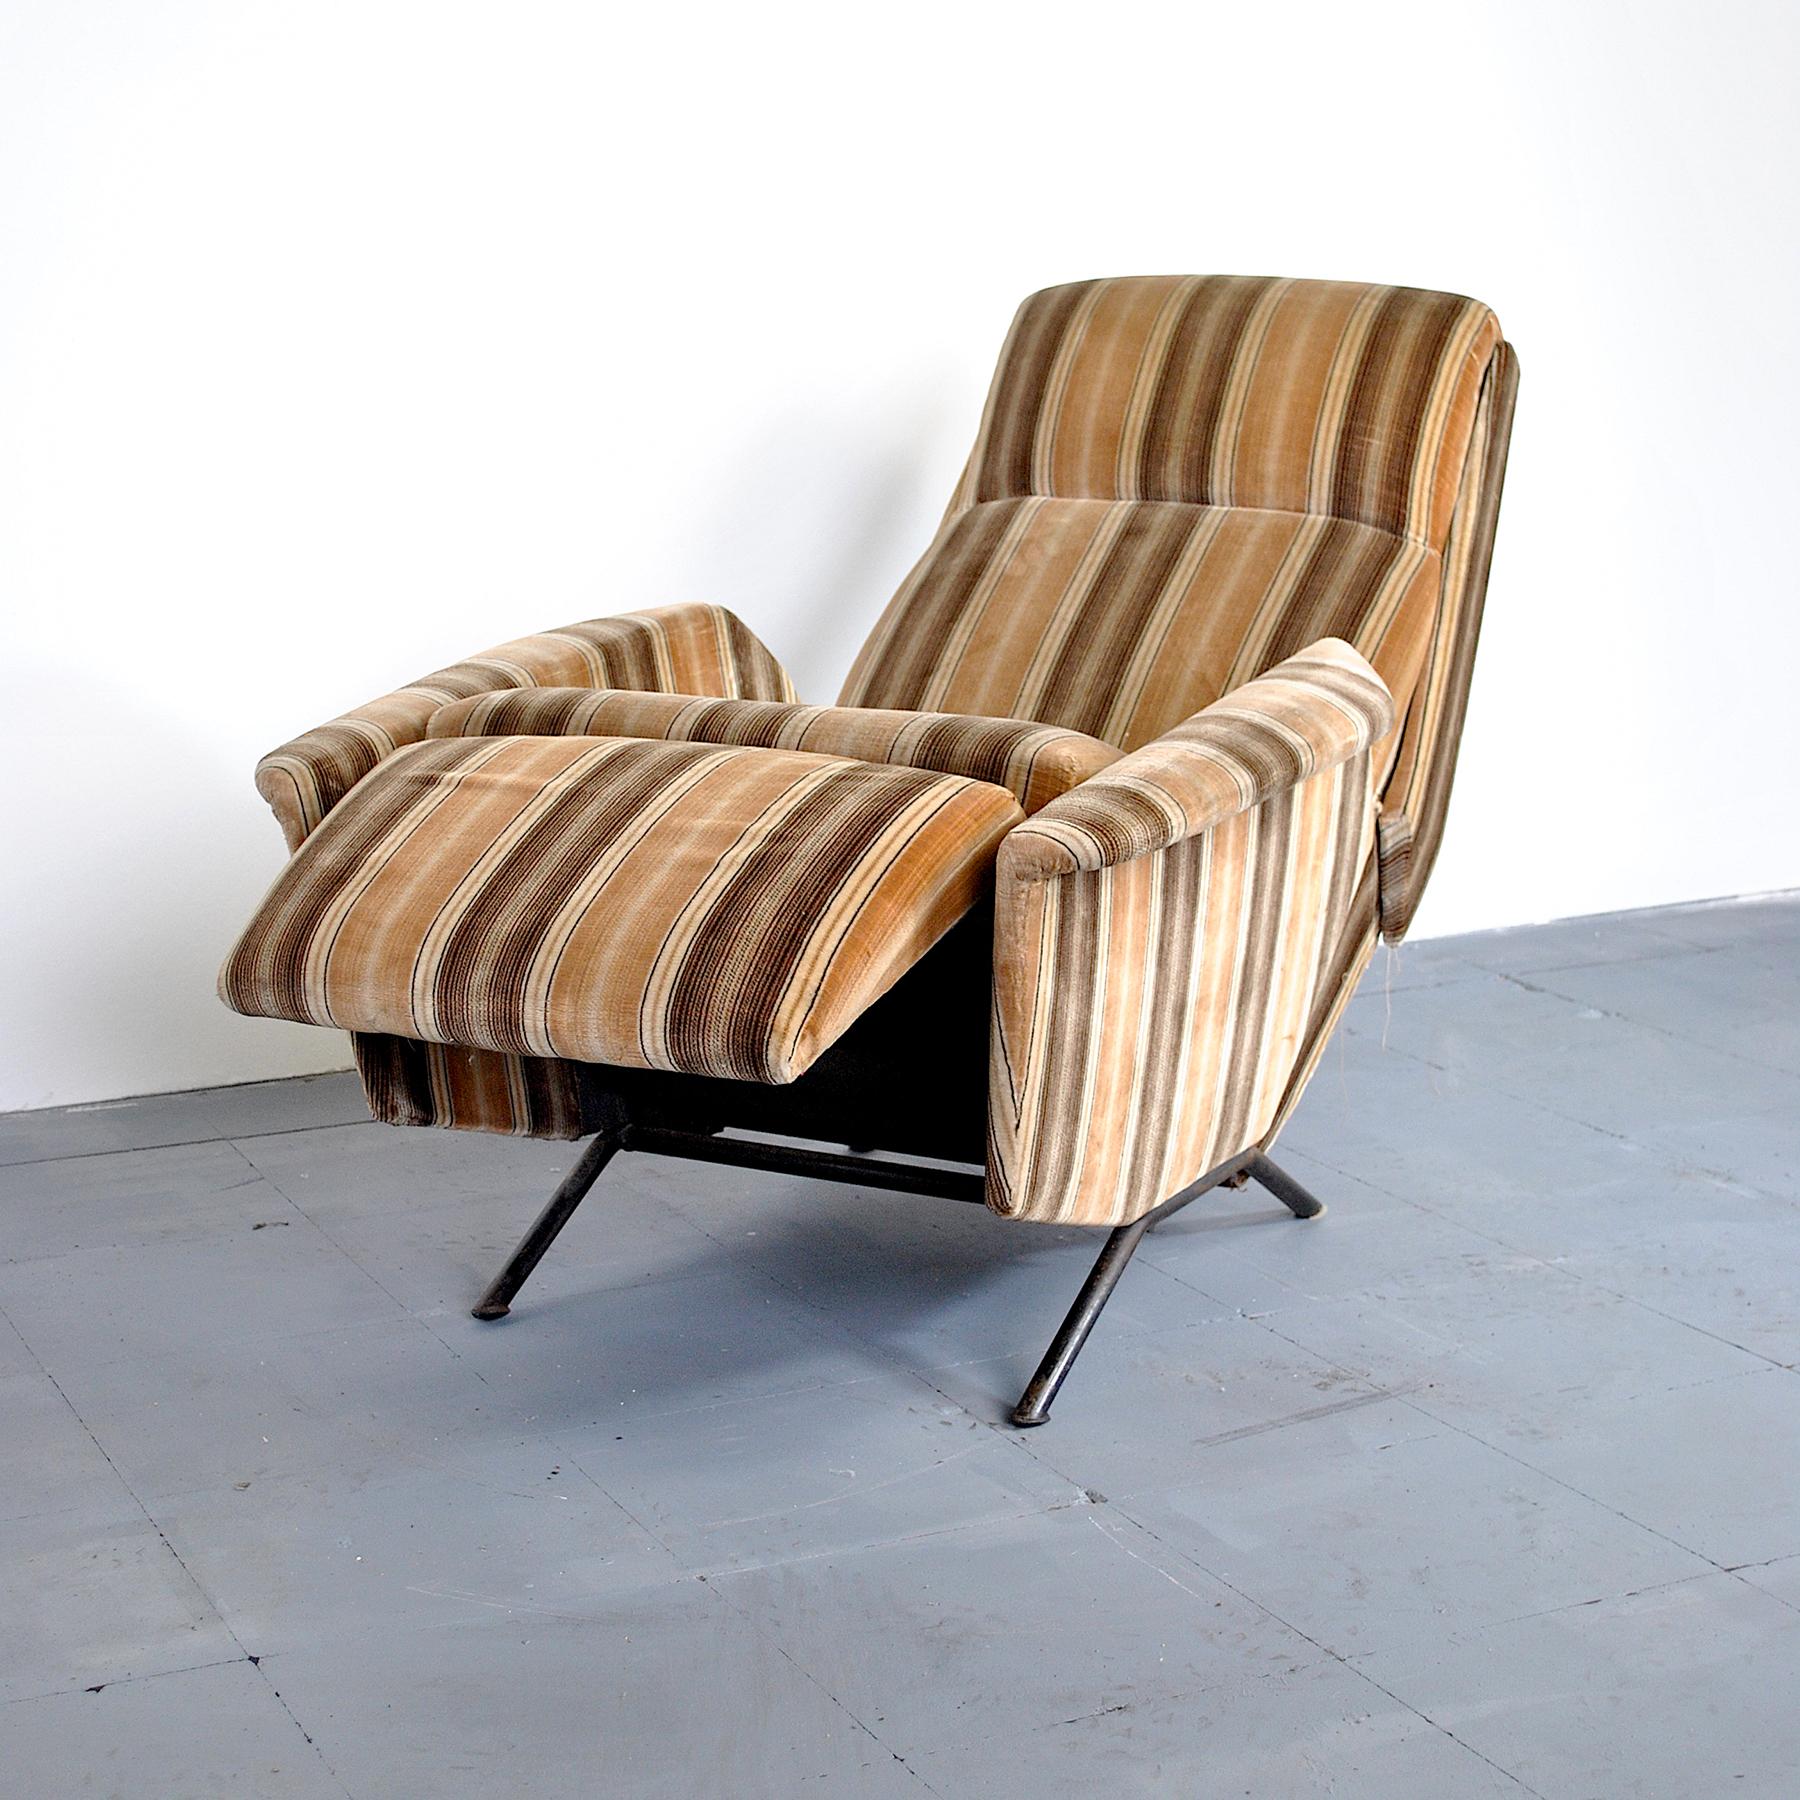 Gio Ponti in the Manner Armchair 1